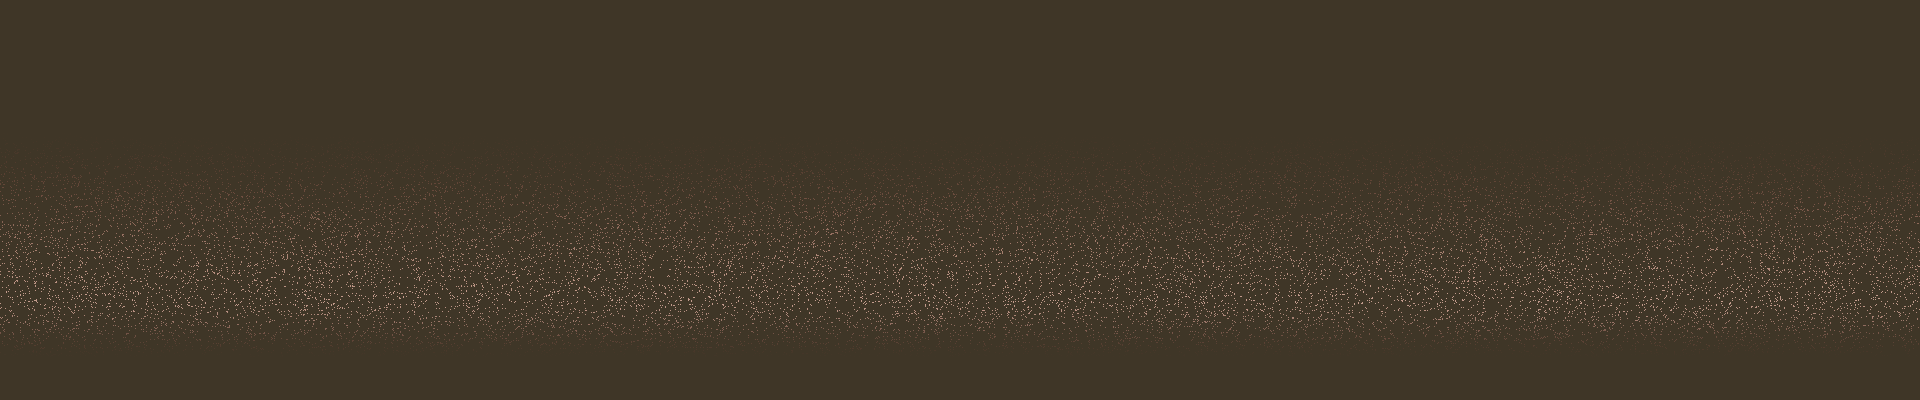 Brown_sand_background.png